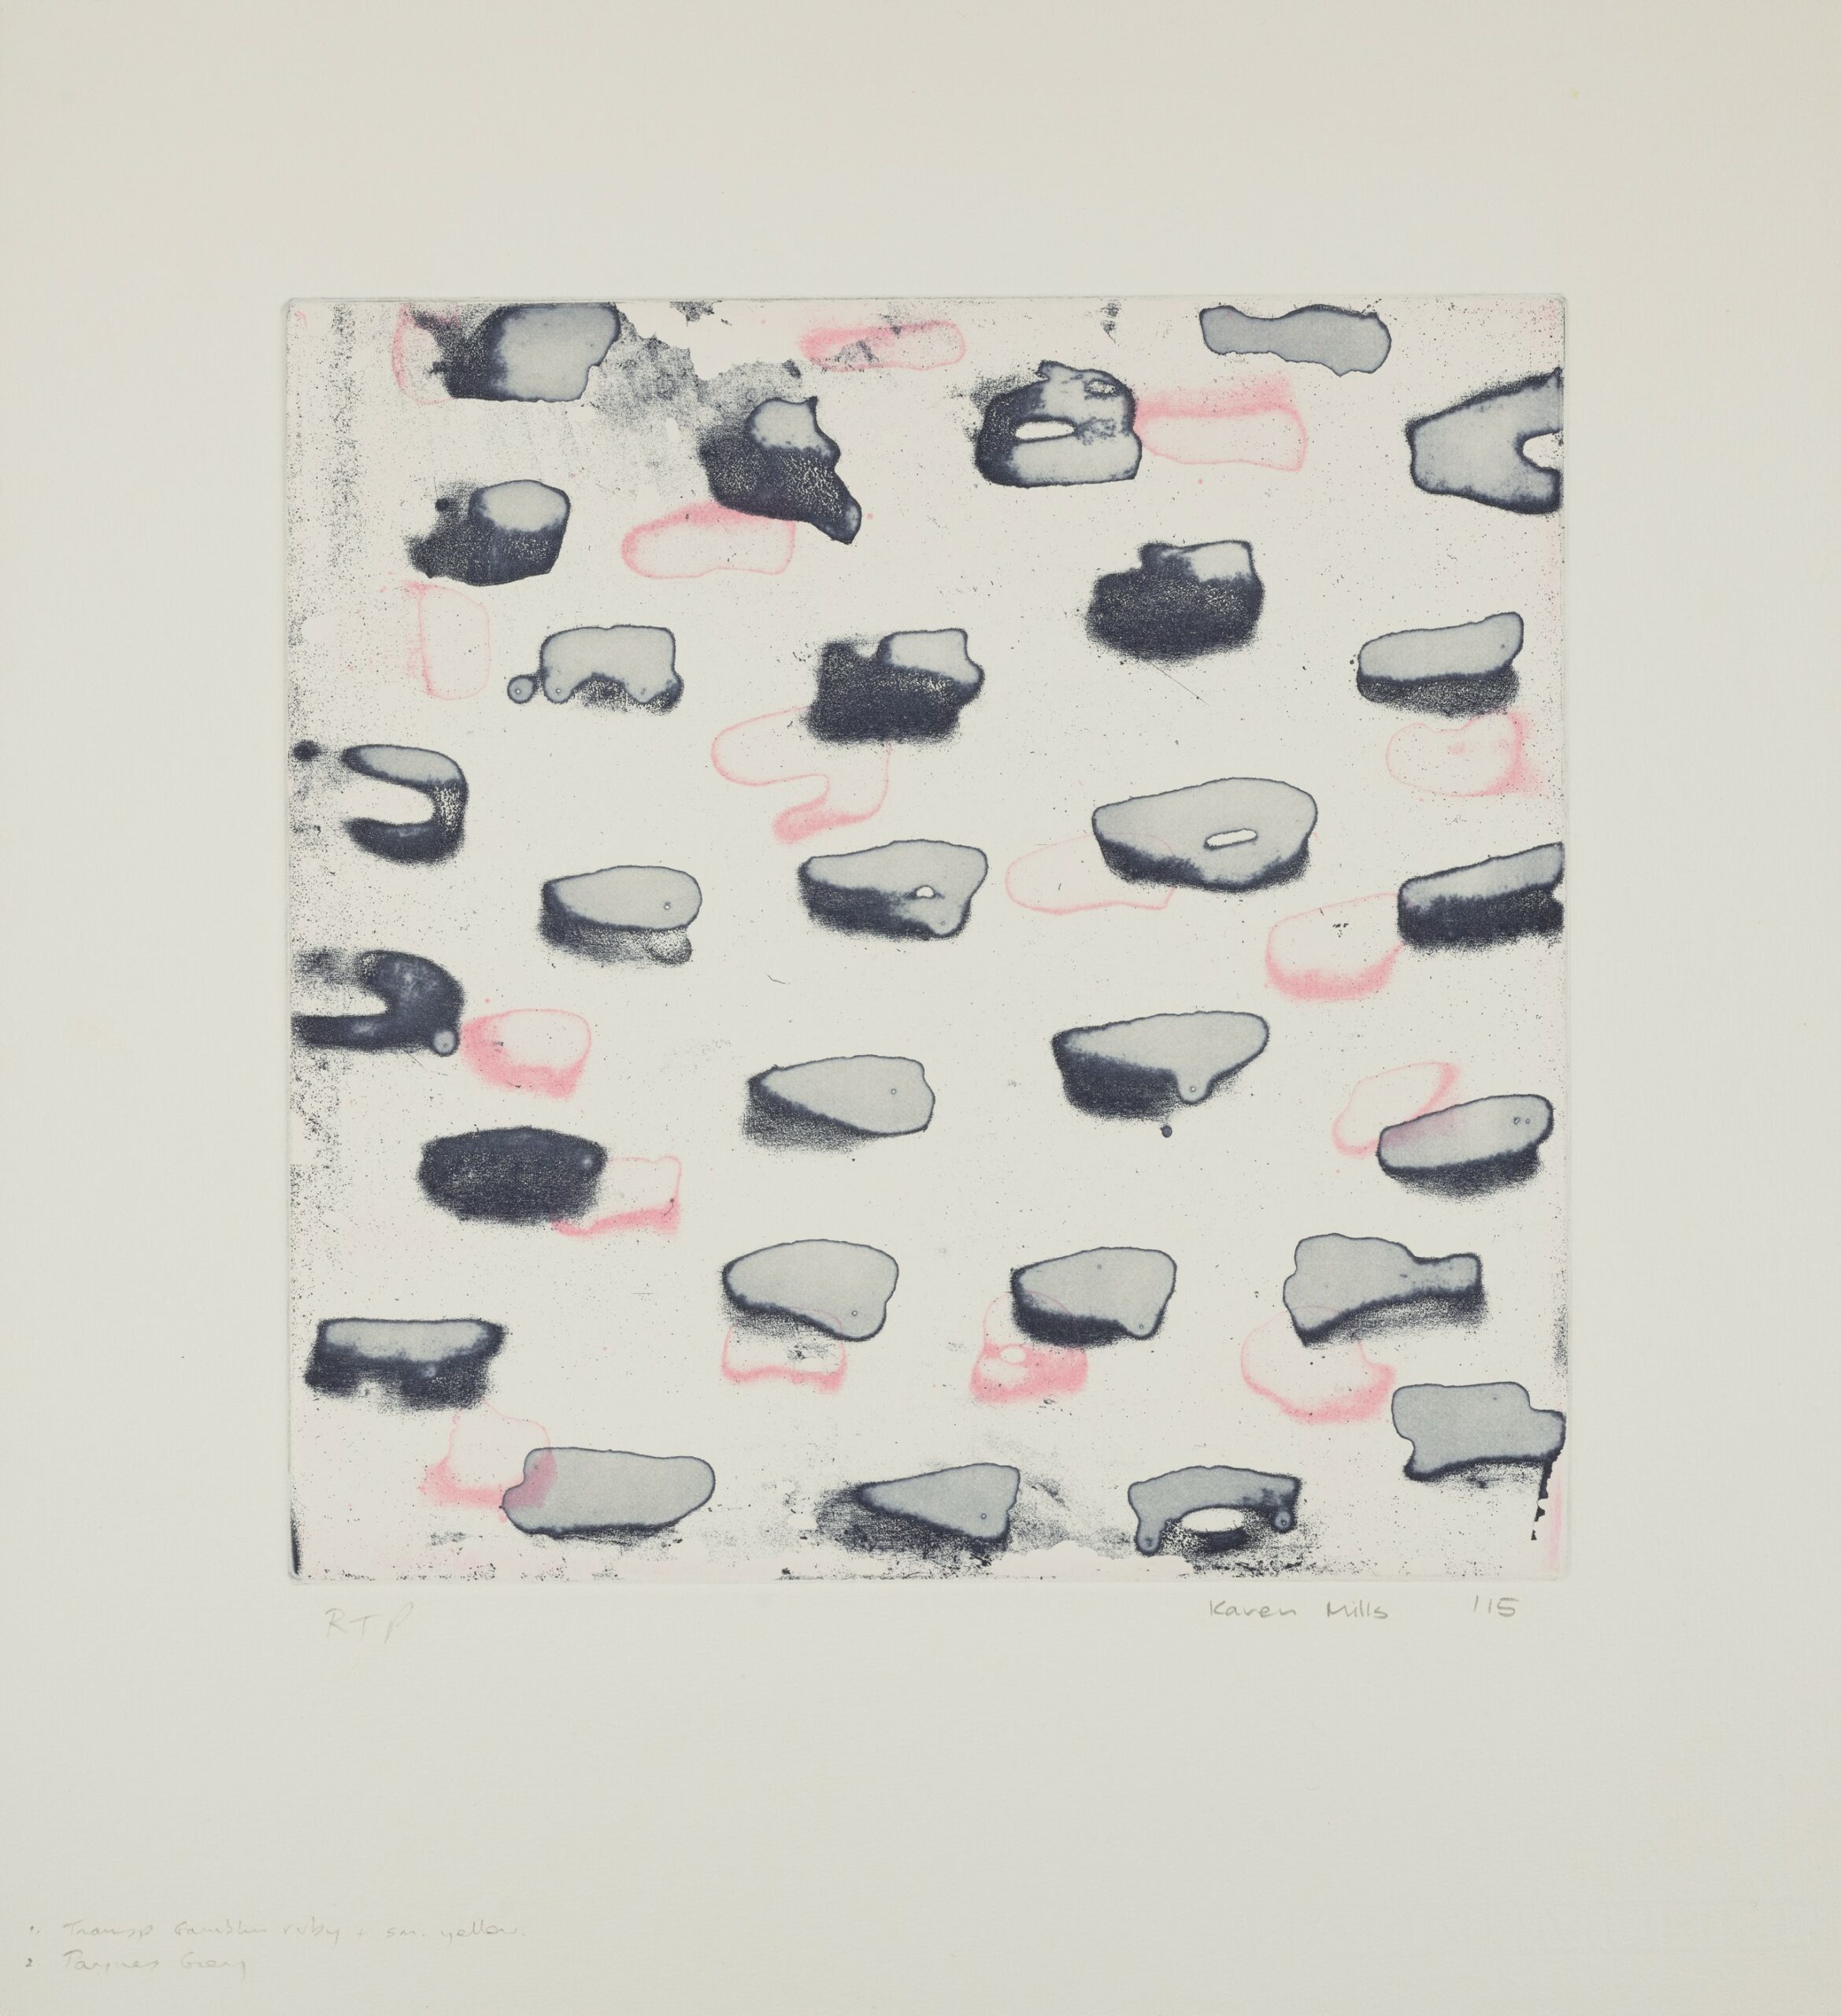 KAREN MILLS, Untitled, 2015, etching on Hahnemühle paper, collaborator: Basil Hall, printer: Basil Hall. Kluge-Ruhe Aboriginal Art Collection of the University of Virginia, gift of Basil Hall, 2023.0006.842. Courtesy of the artist.